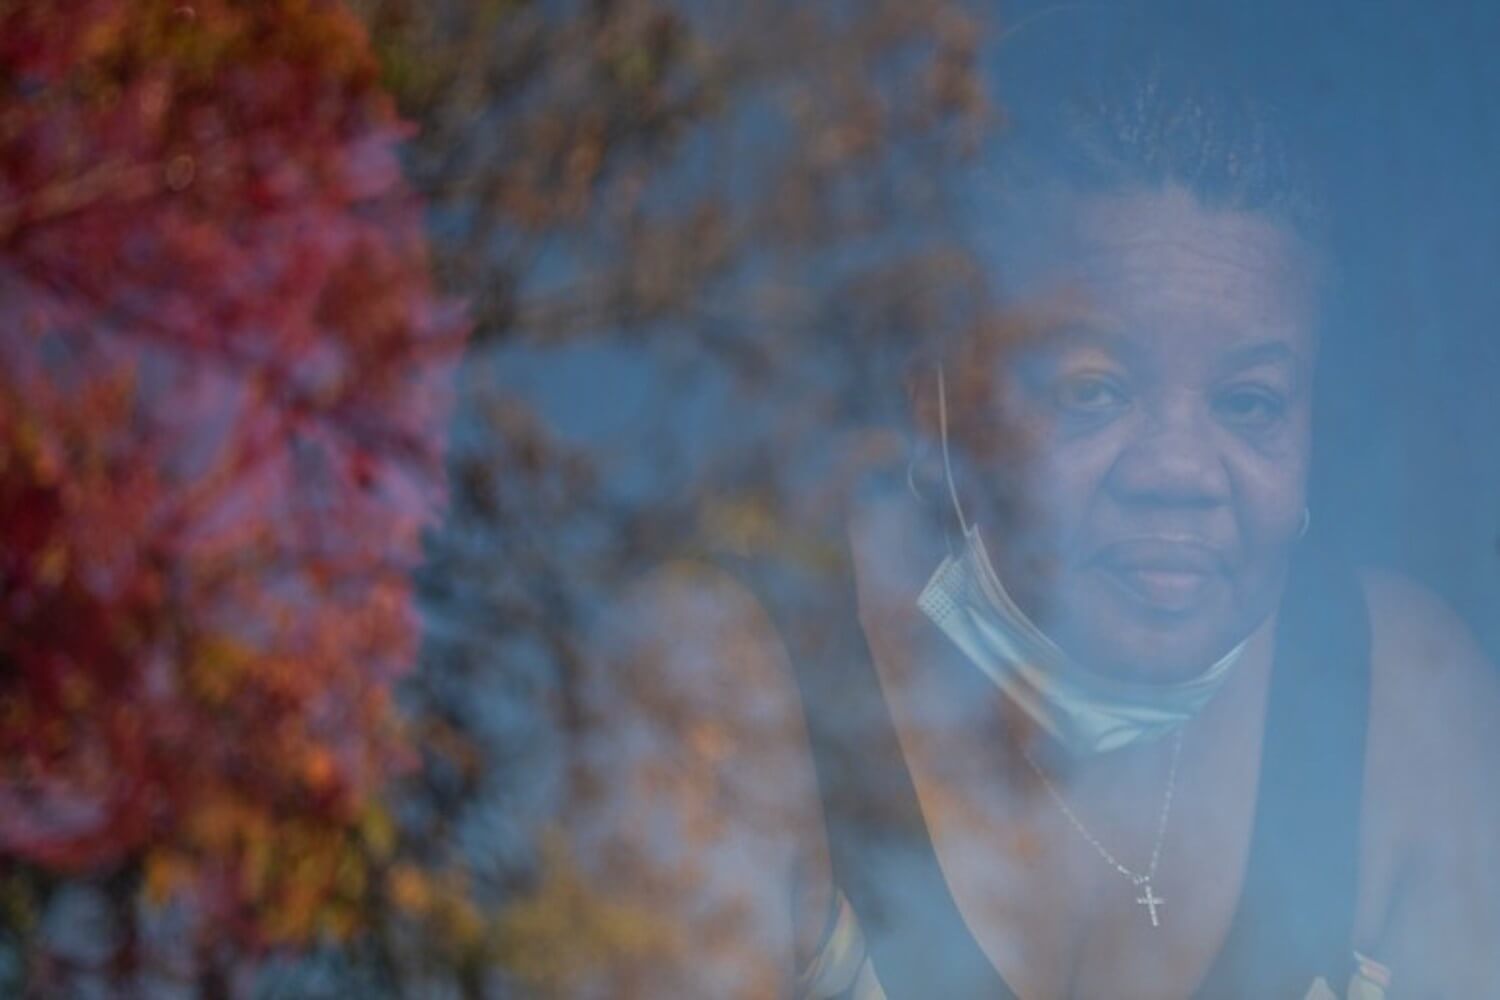 Deborah Bell-Holt looks out the window of her house in Jefferson Park near Downtown Los Angeles on Jan. 21, 2021.